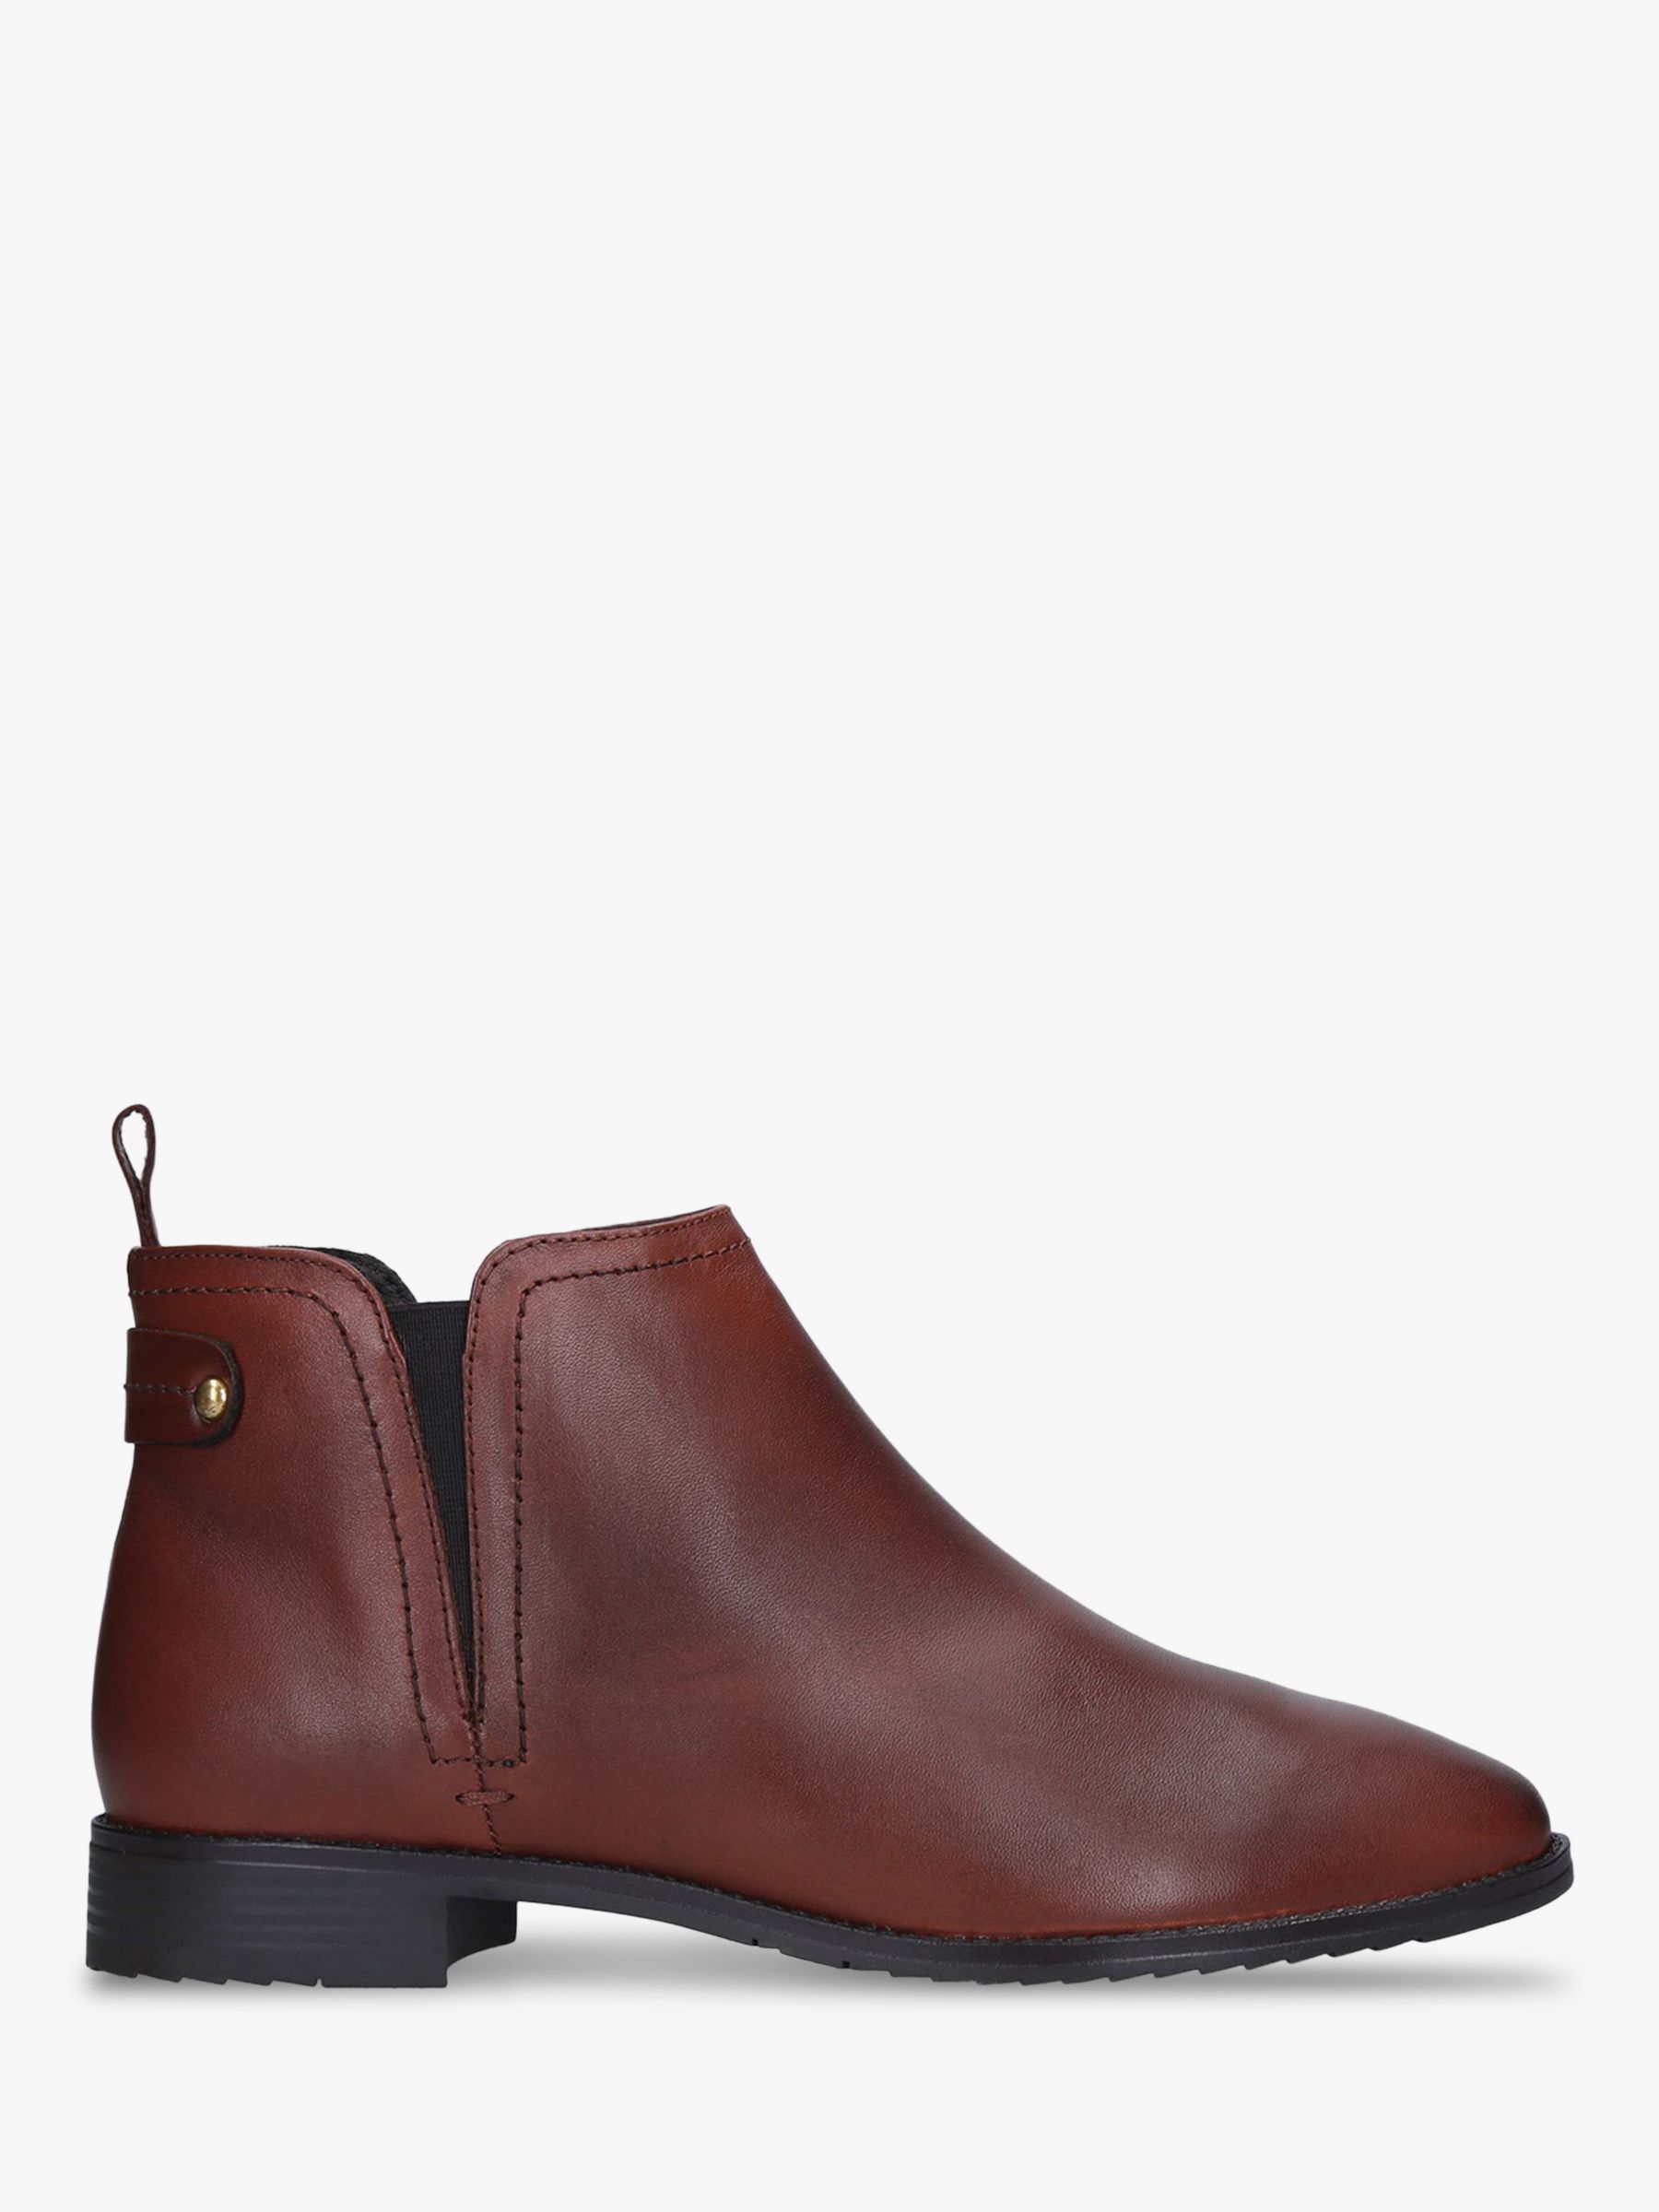 Carvela Comfort Rexx Leather Chelsea Boots | Brown Tan at John Lewis ...